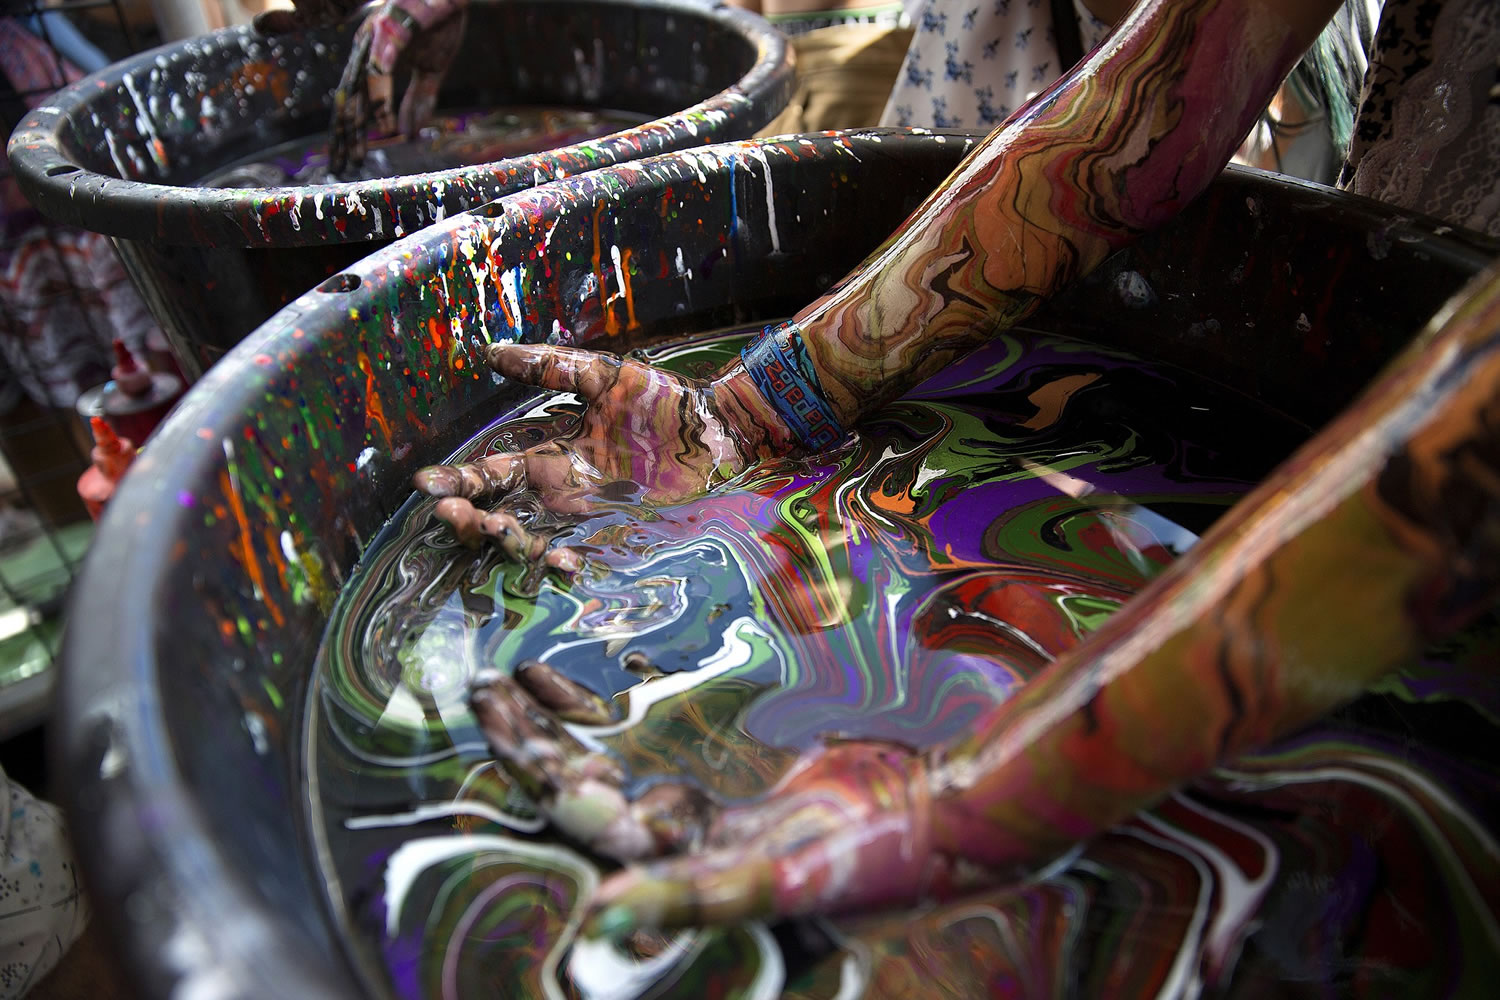 People tie-dye their arms in large barrels Saturday at Lollapalooza Music Festival in Grant Park in Chicago.